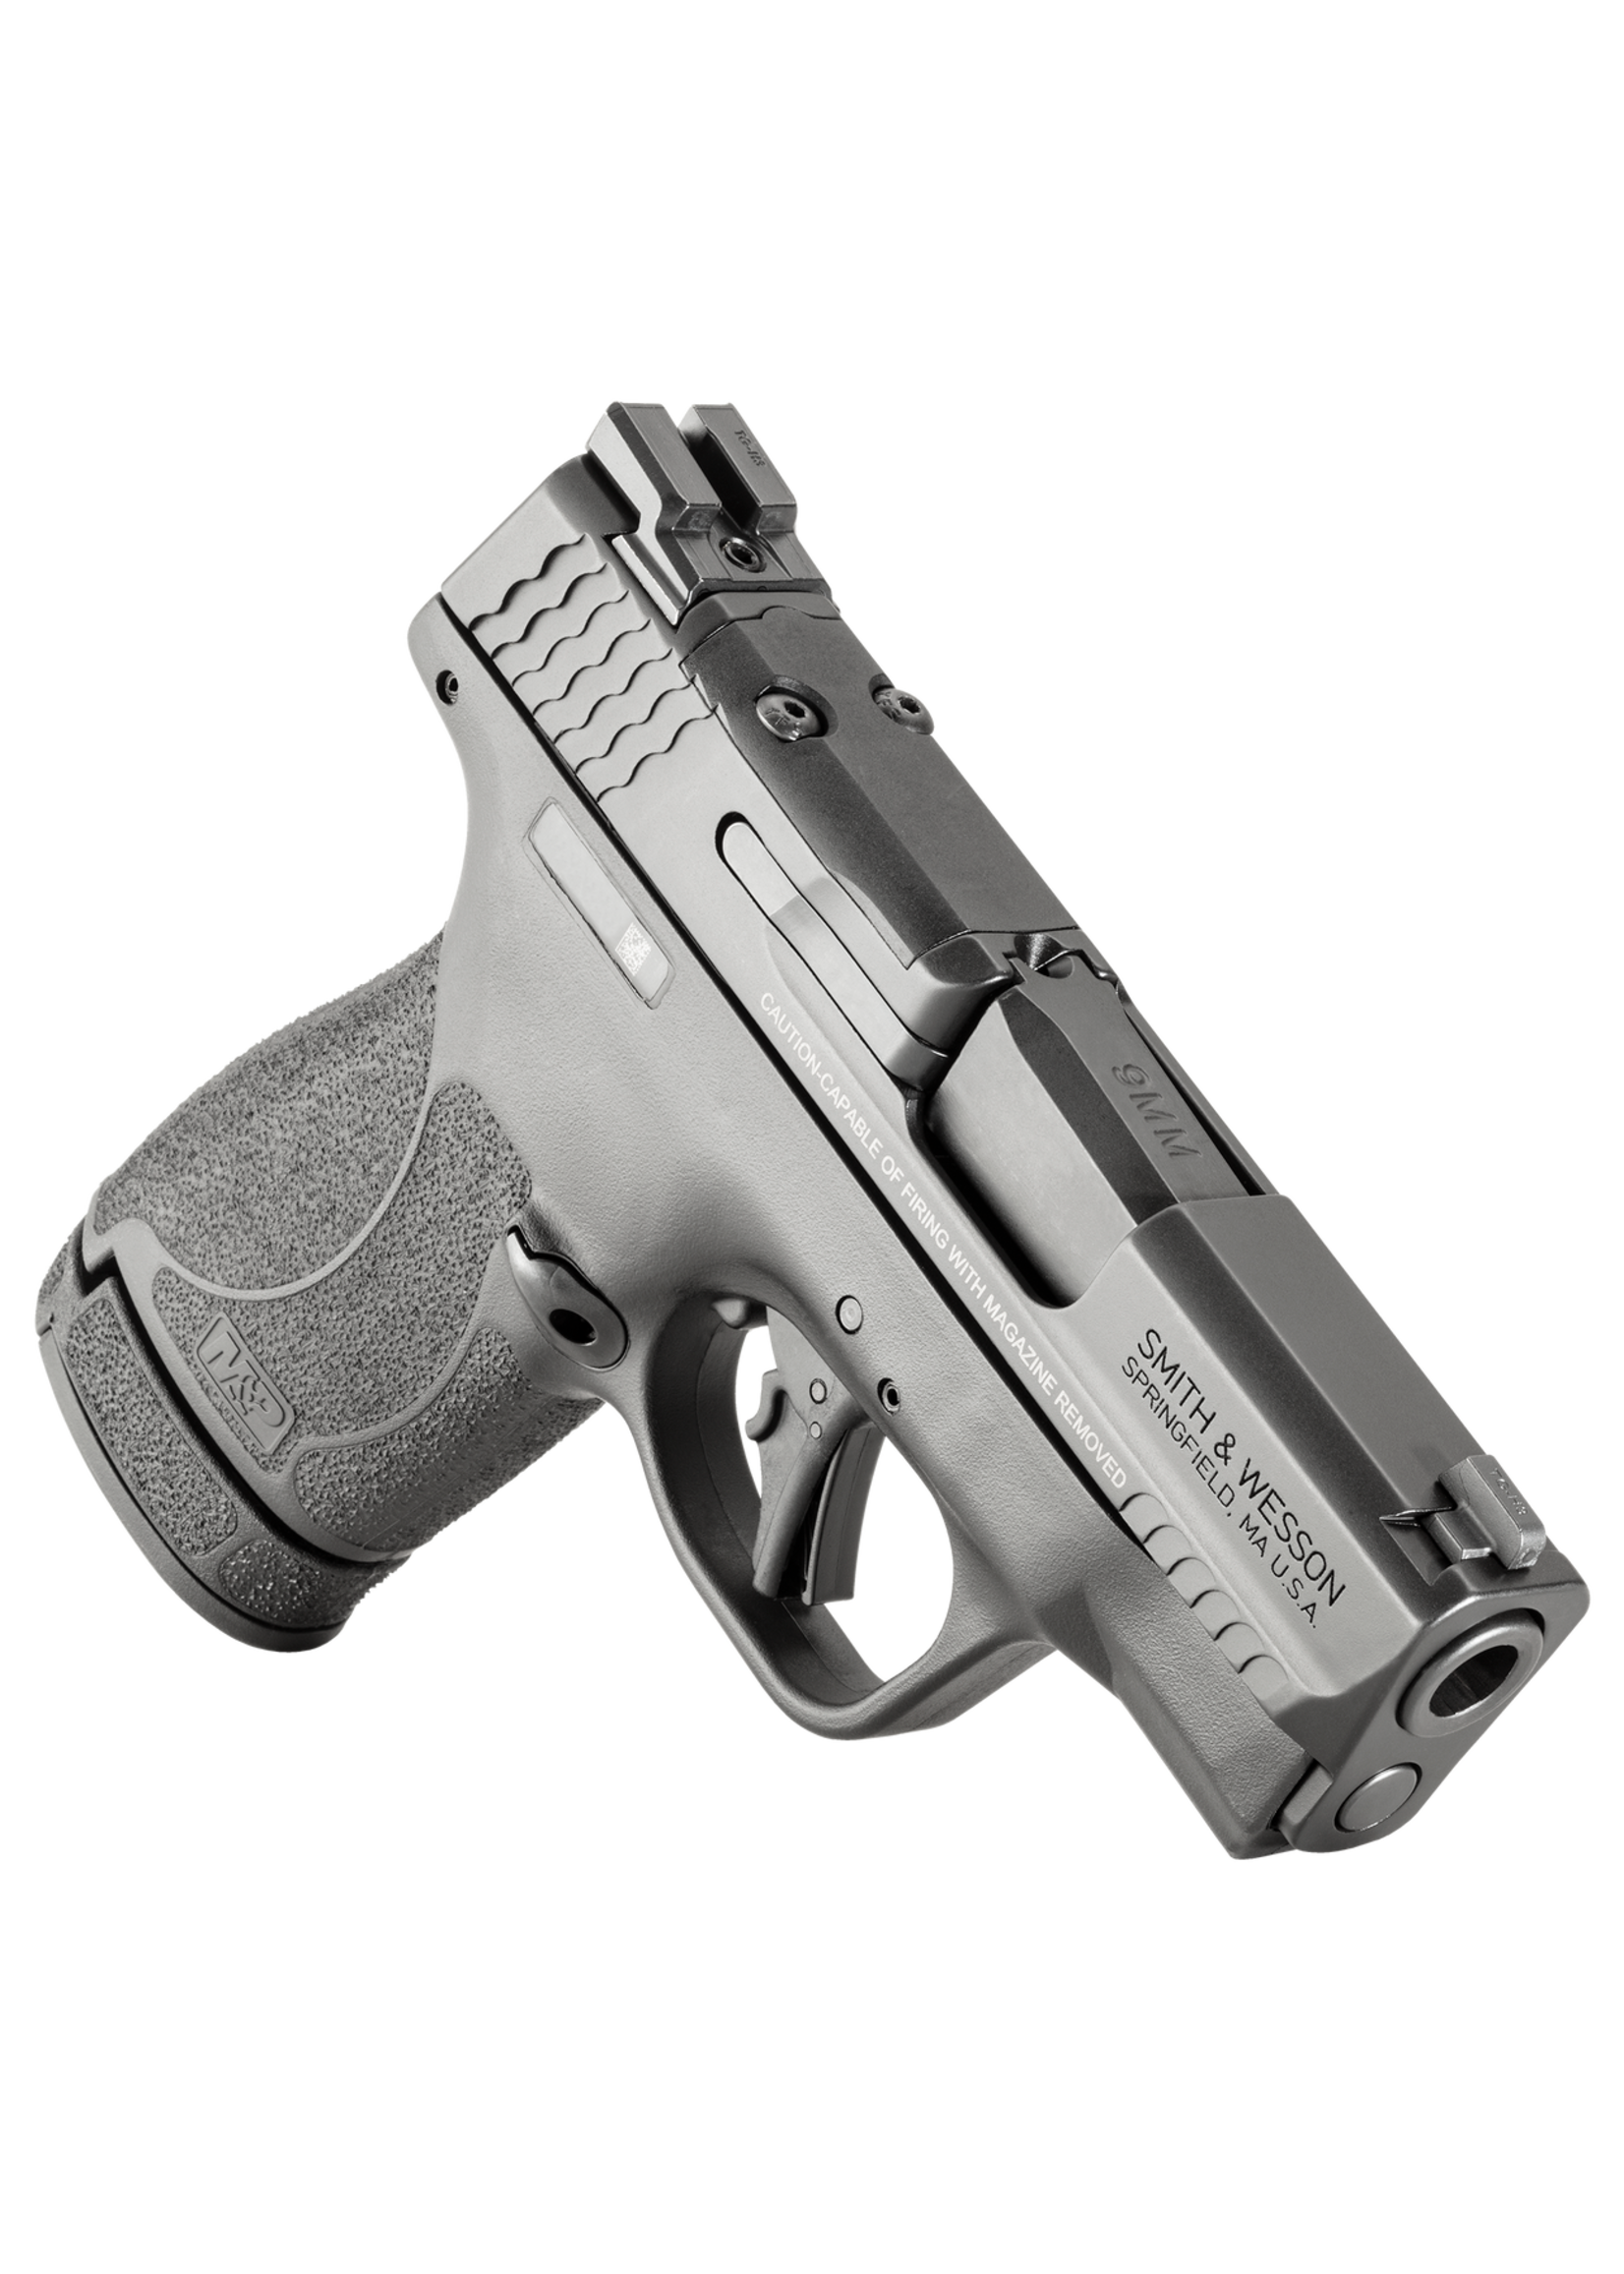 SMITH & WESSON SMITH & WESSON M&P9 SHIELD PLUS OR 9MM 13RD 3.1"